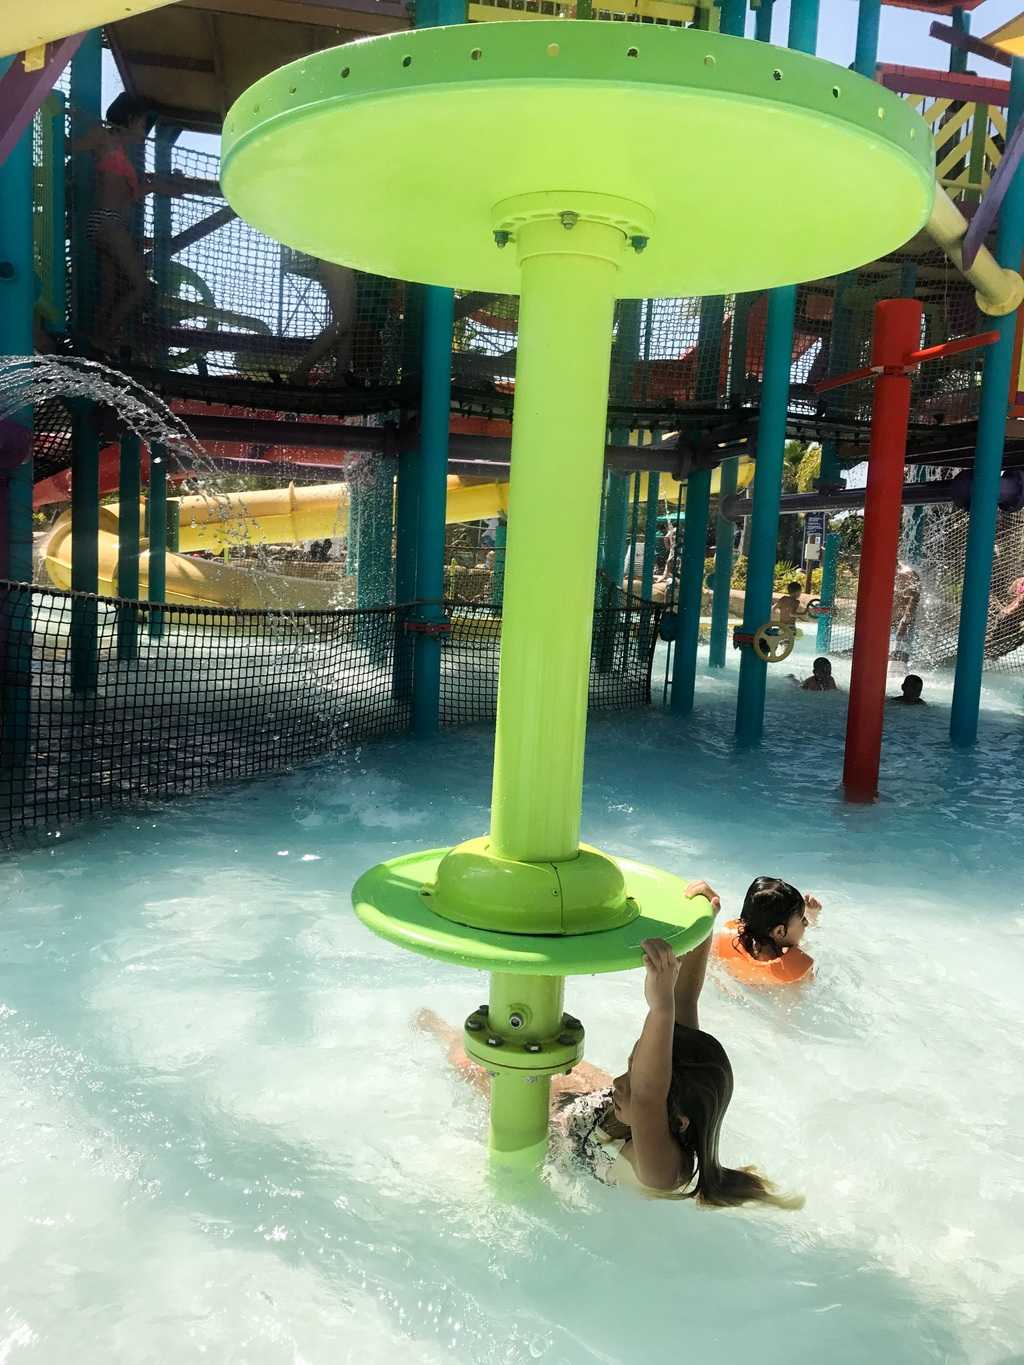 Are you looking for a fun place to cool off and beat the heat in Southern California? Check out Aquatica San Diego which has over a dozen water slides that appeal to all different ages and thrill-seekers. They even have live flamingo and sea turtle encounters!